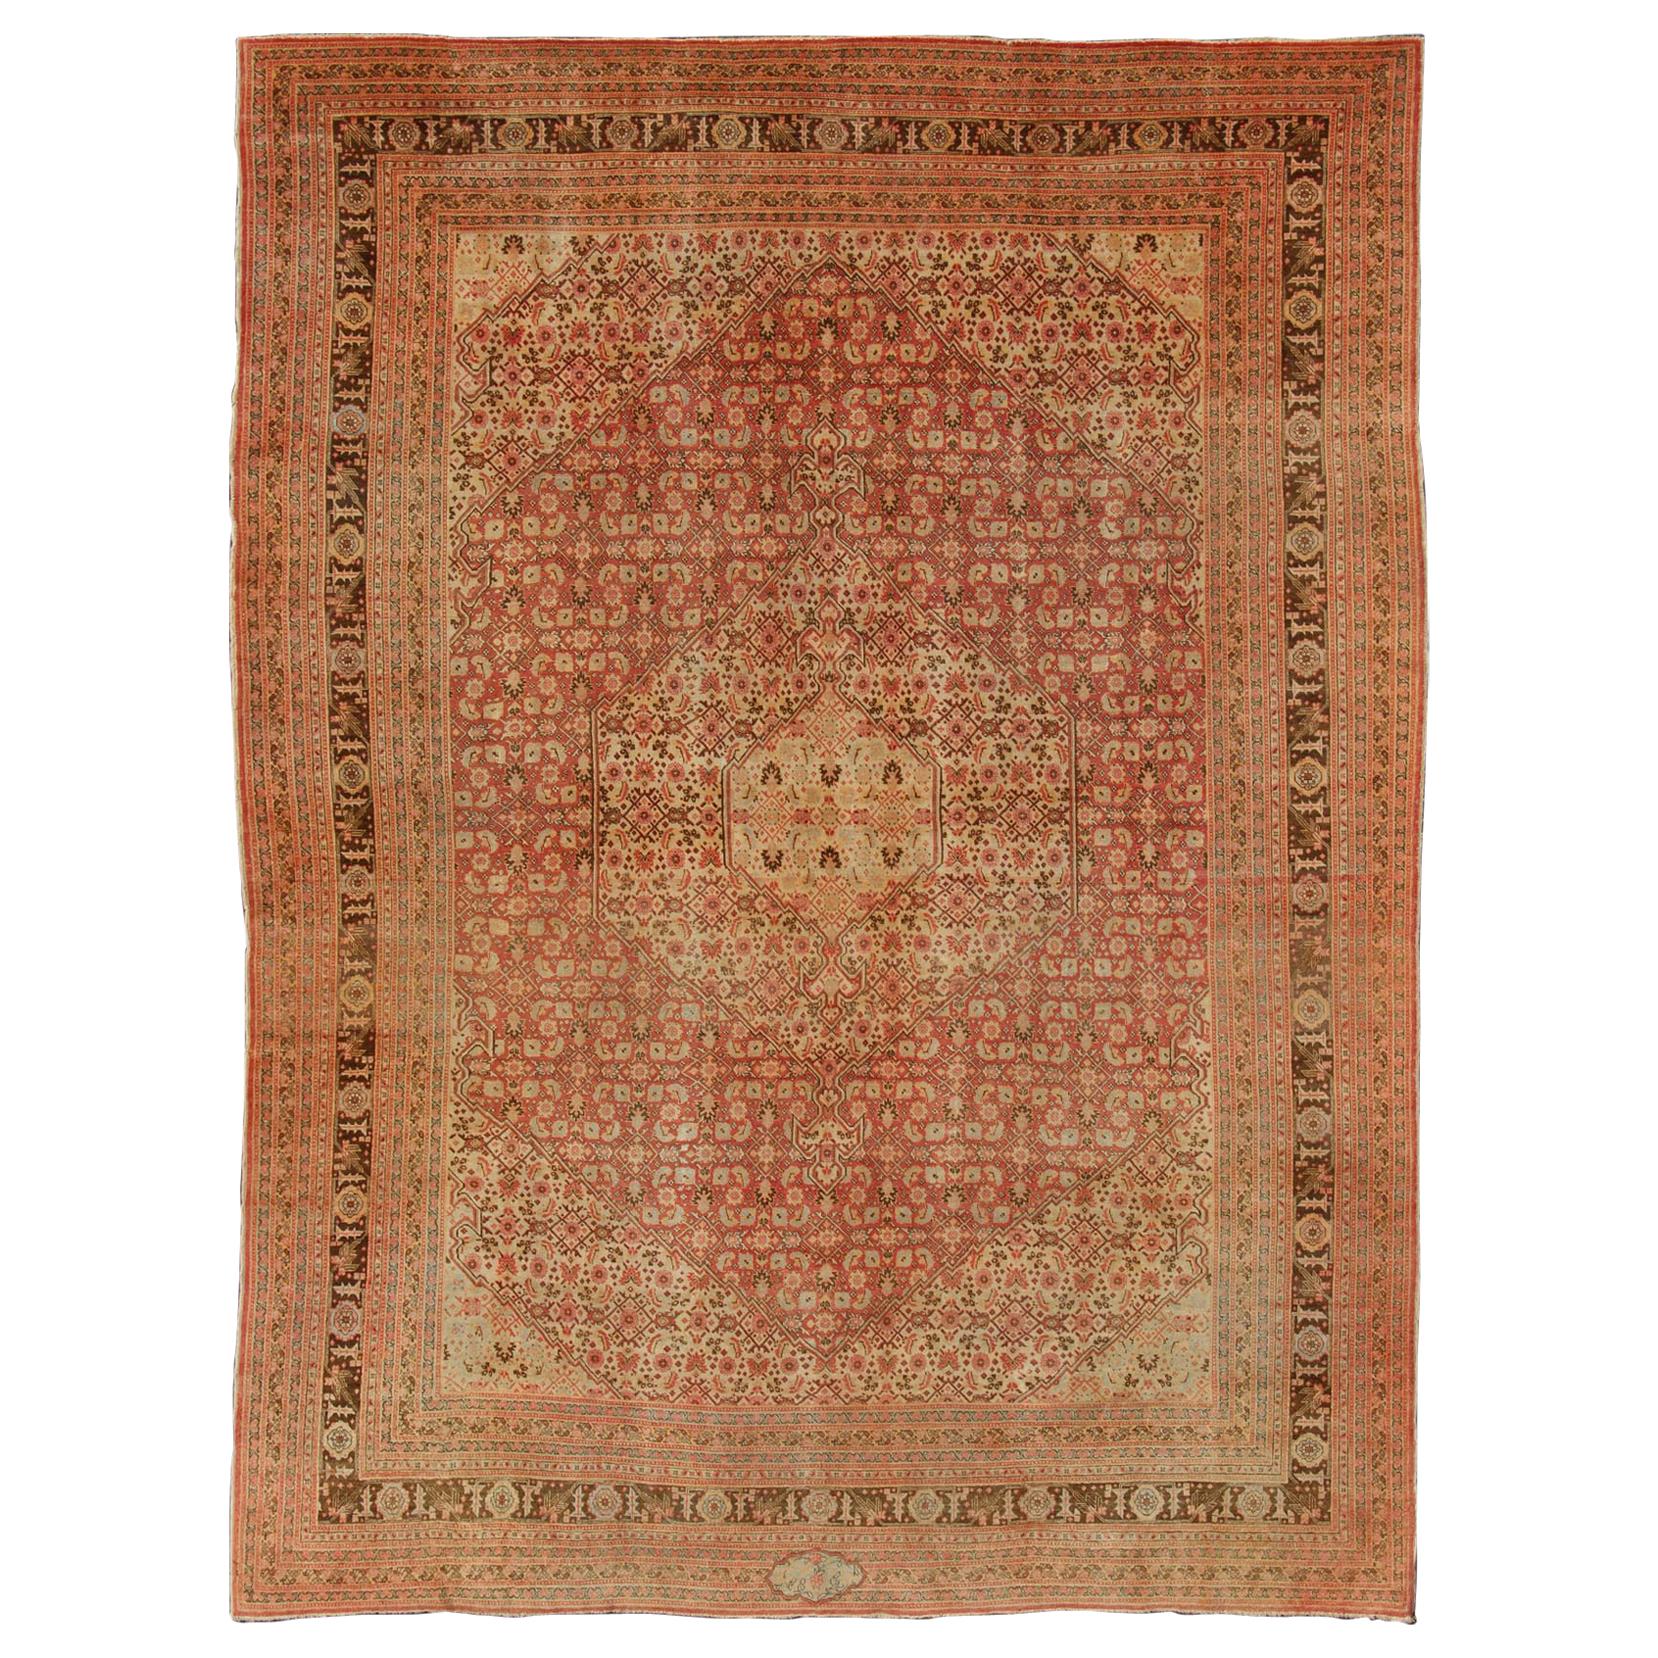 Antique Persian Tabriz Rug with Medallion Design in Coral, Cream and Brown Tones For Sale